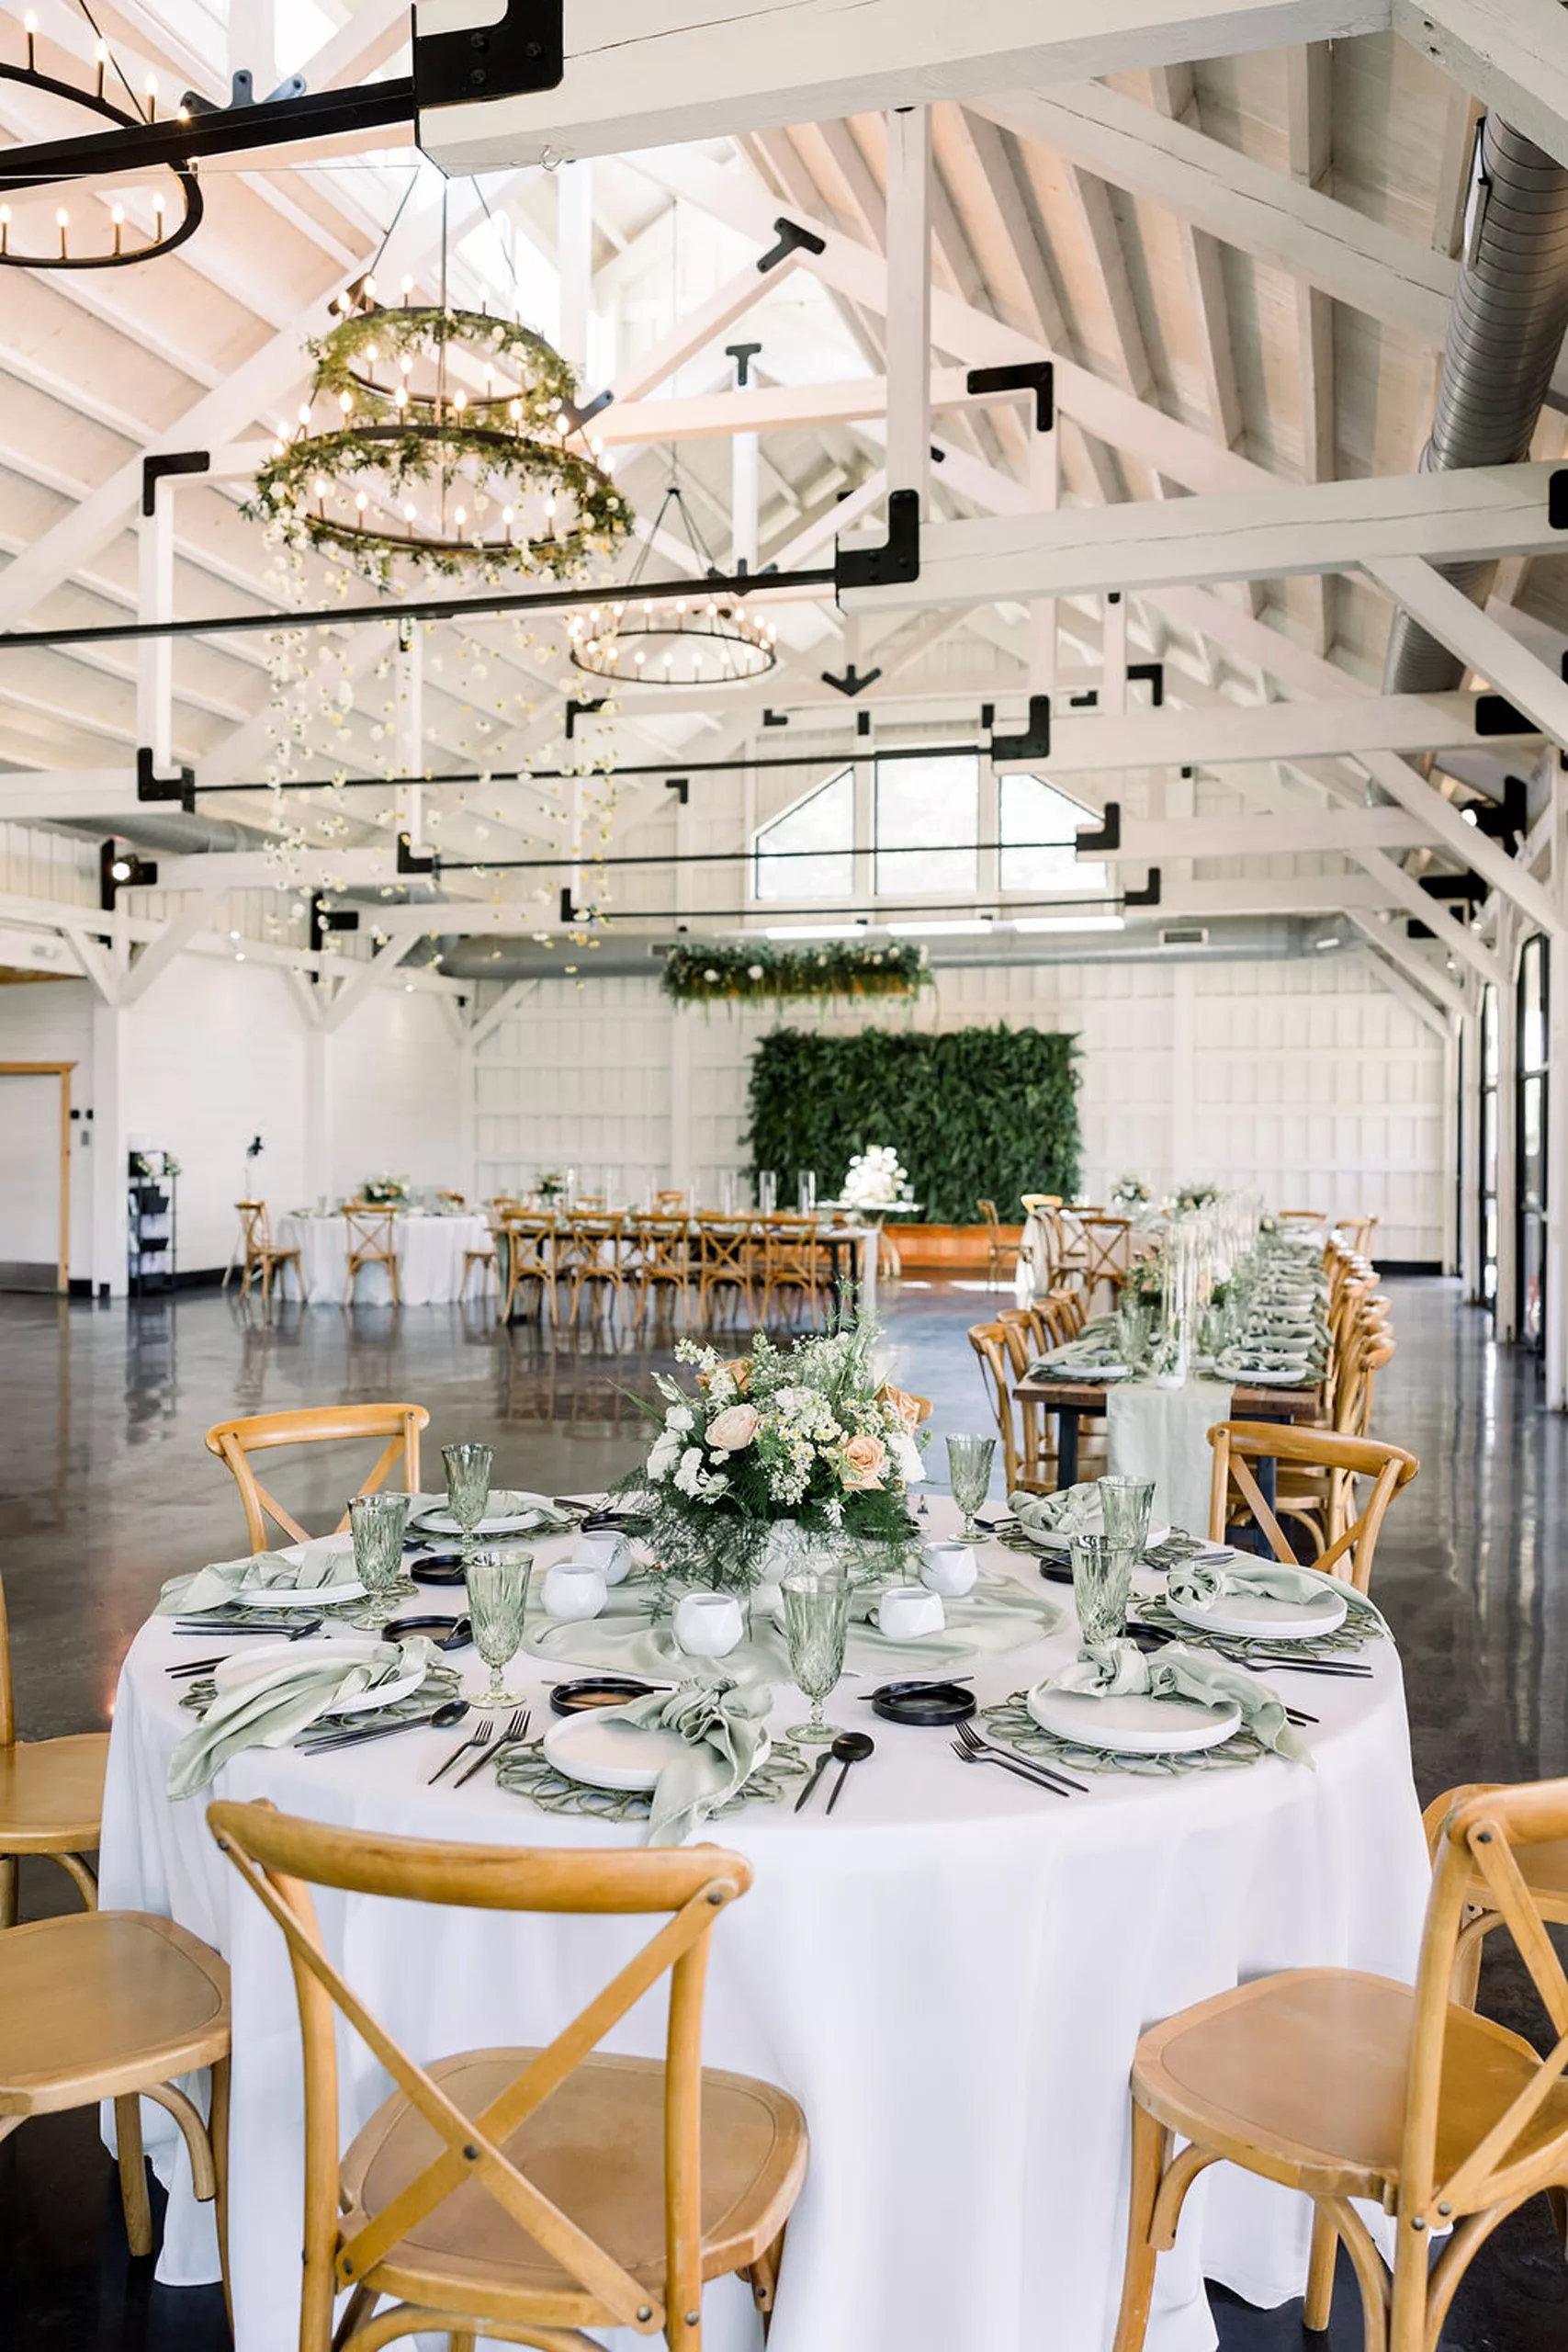 Details of a wedding reception venue set up with white exposed beams, chandeliers and white linens